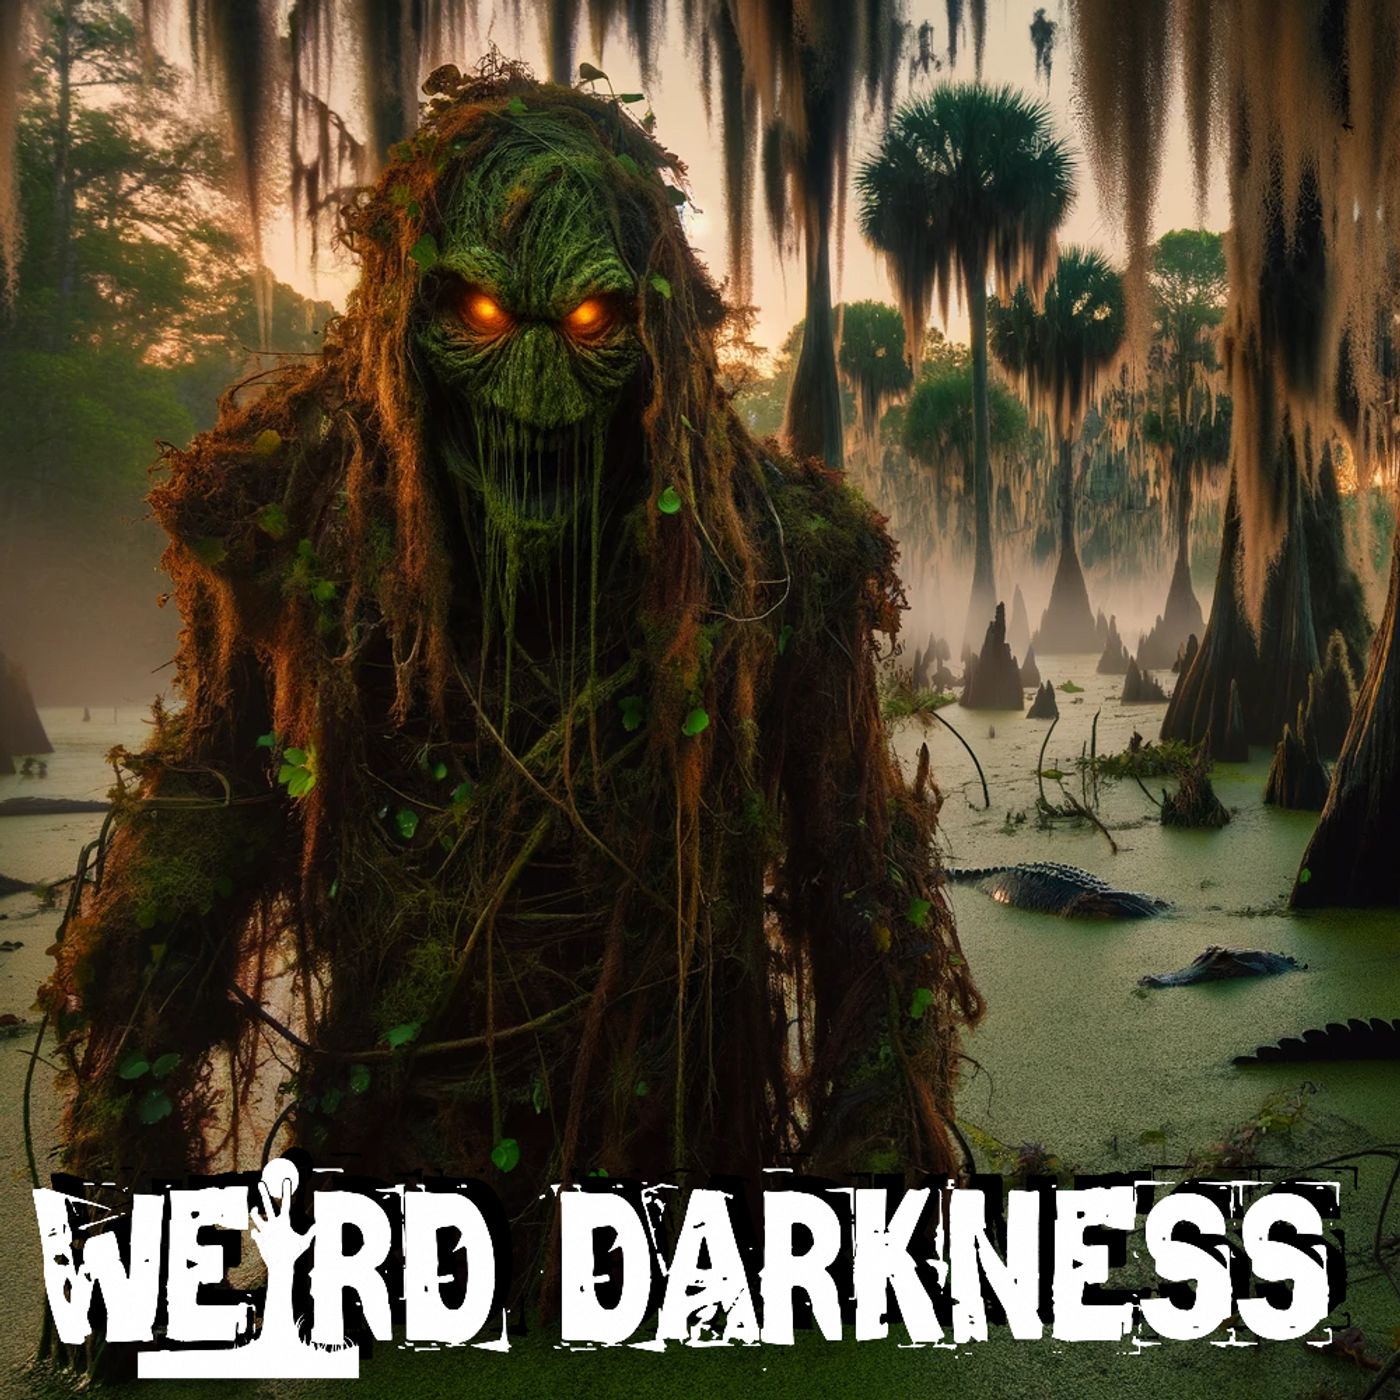 “MYSTERY OF THE MOSS MAN” and More Scary True Stories! #WeirdDarkness